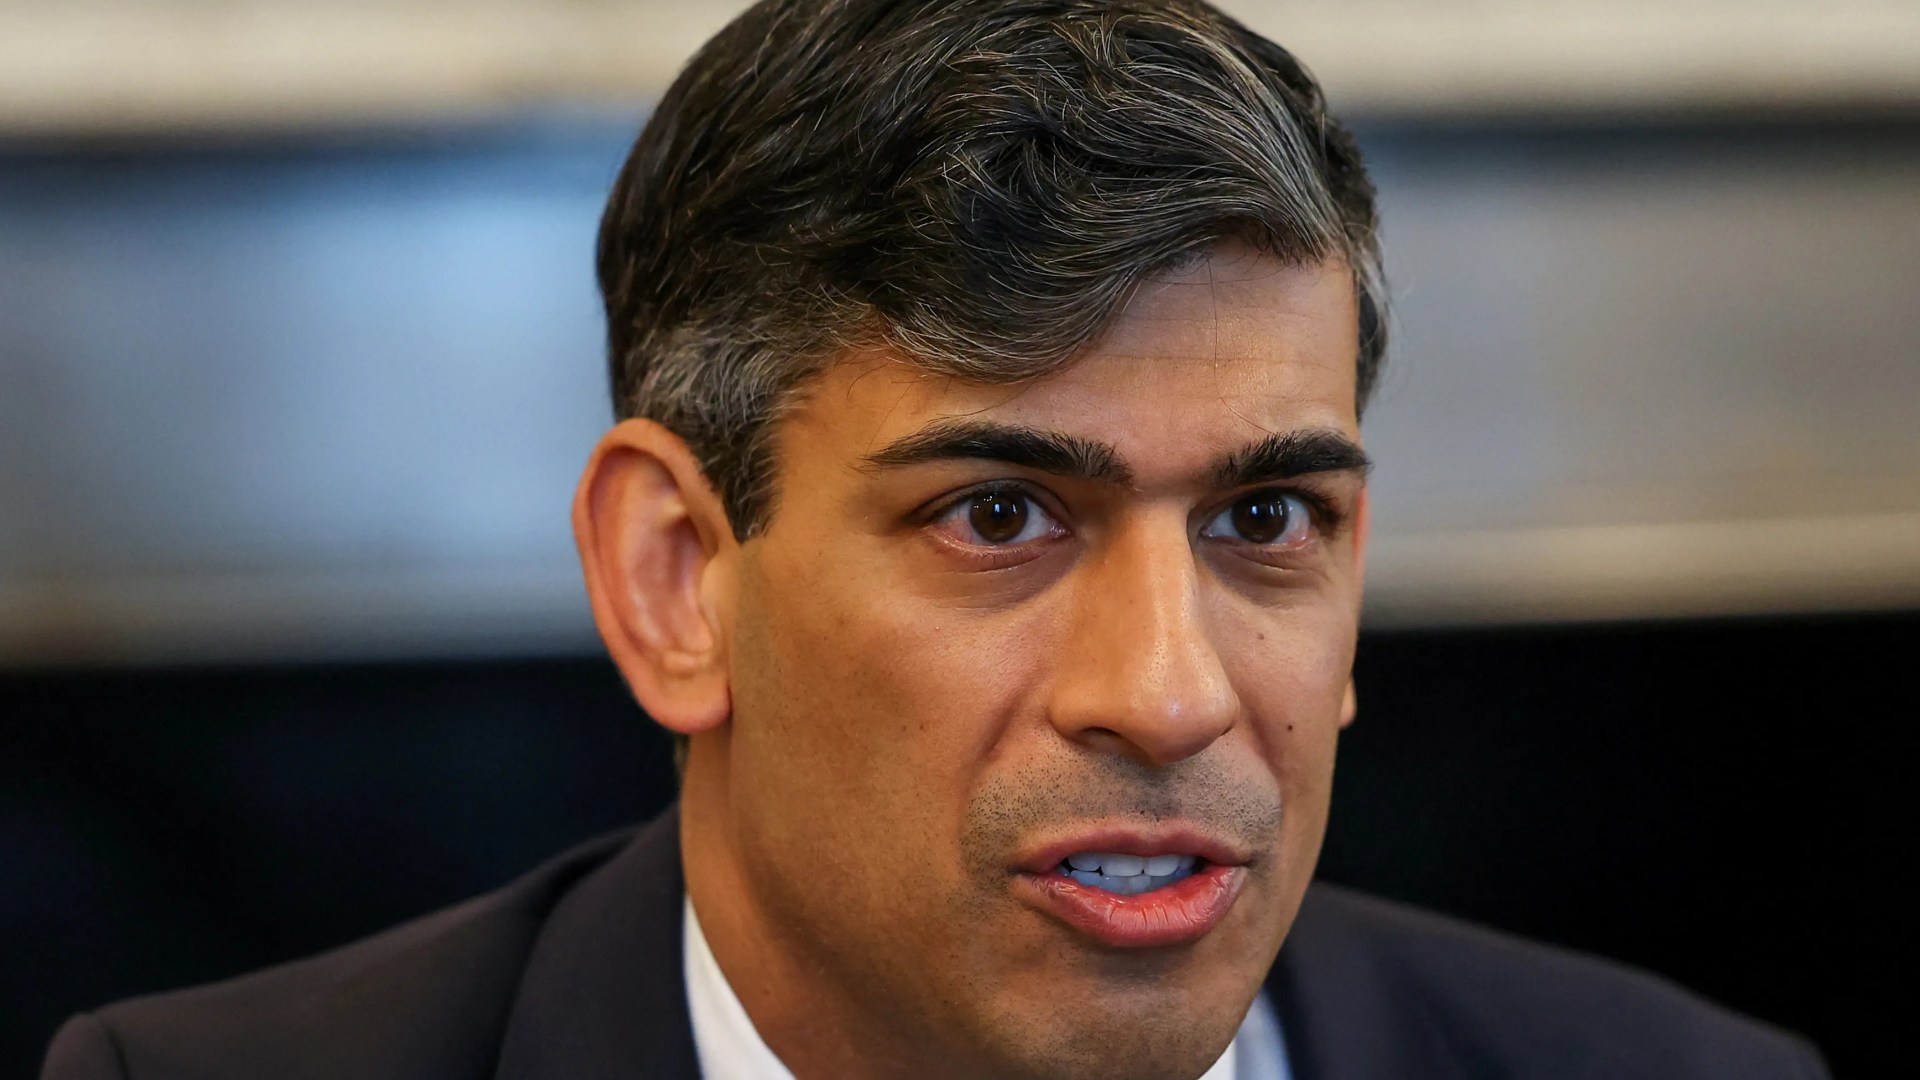 Rishi Sunak may be battered and bruised after drubbing at the polls, but at least he is still a contender [Video]